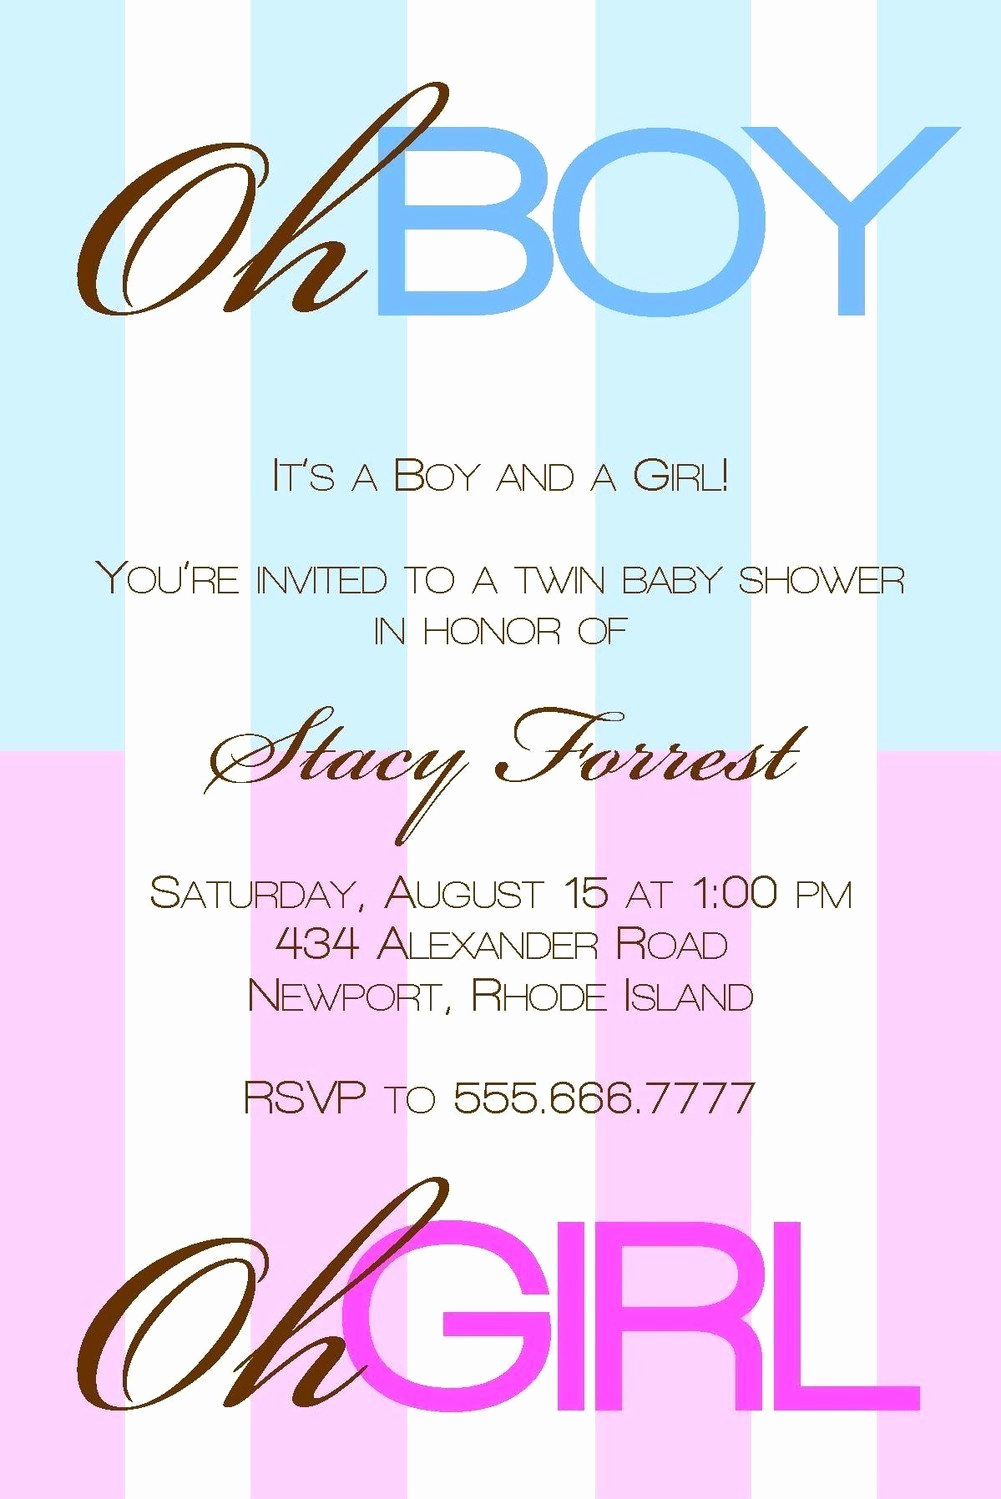 Twin Baby Shower Invitation Wording Lovely Twin Baby Shower Invitation Boy and Girl